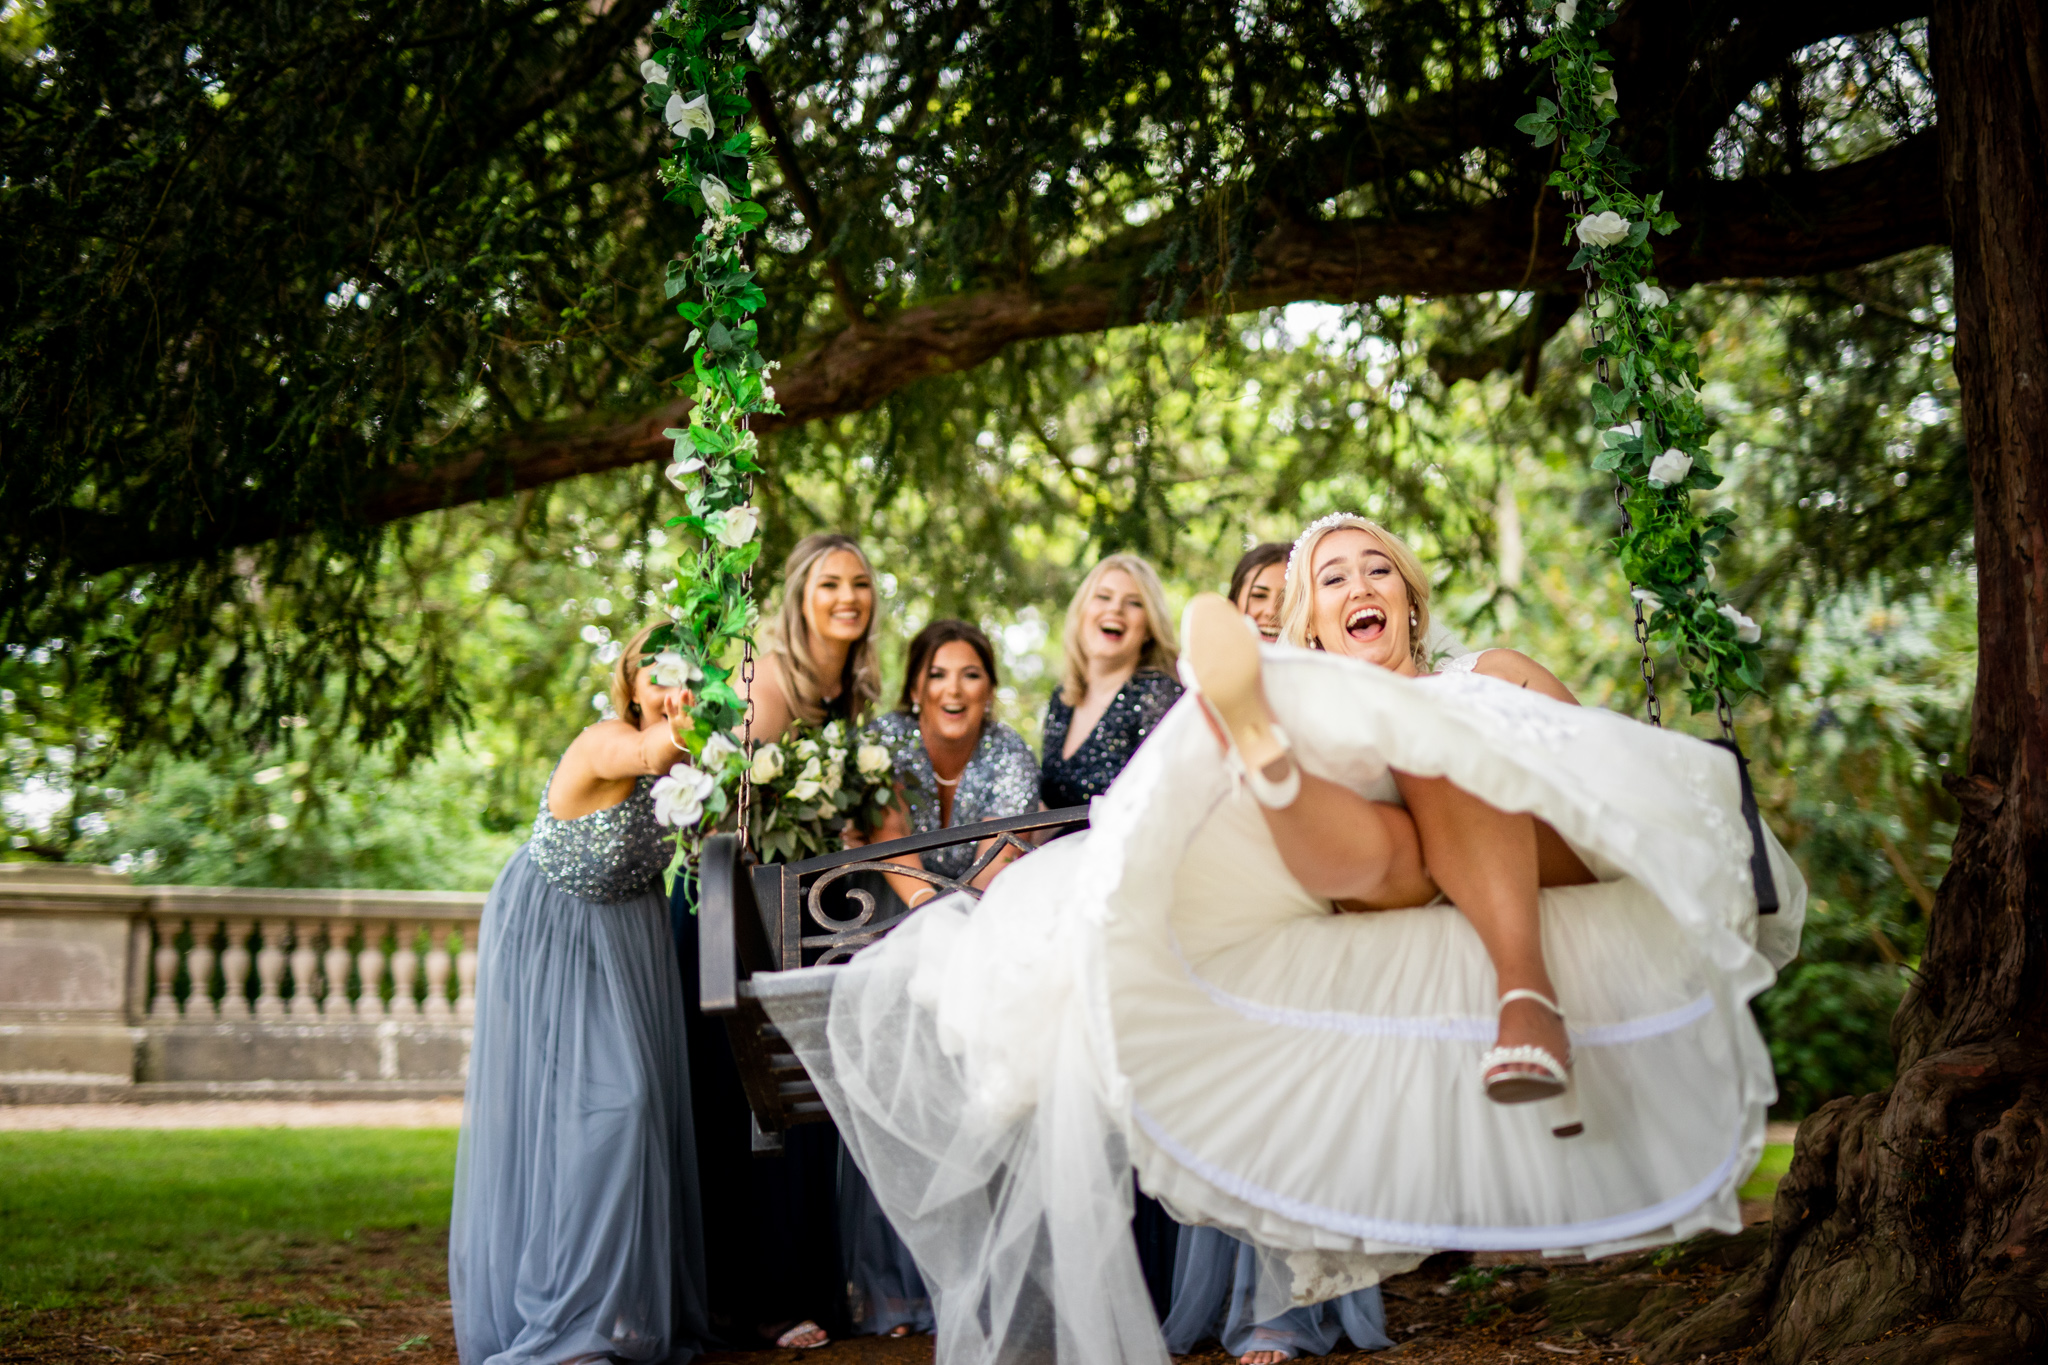 Bride laughing as she is pushed on a large swing by her bridesmaids